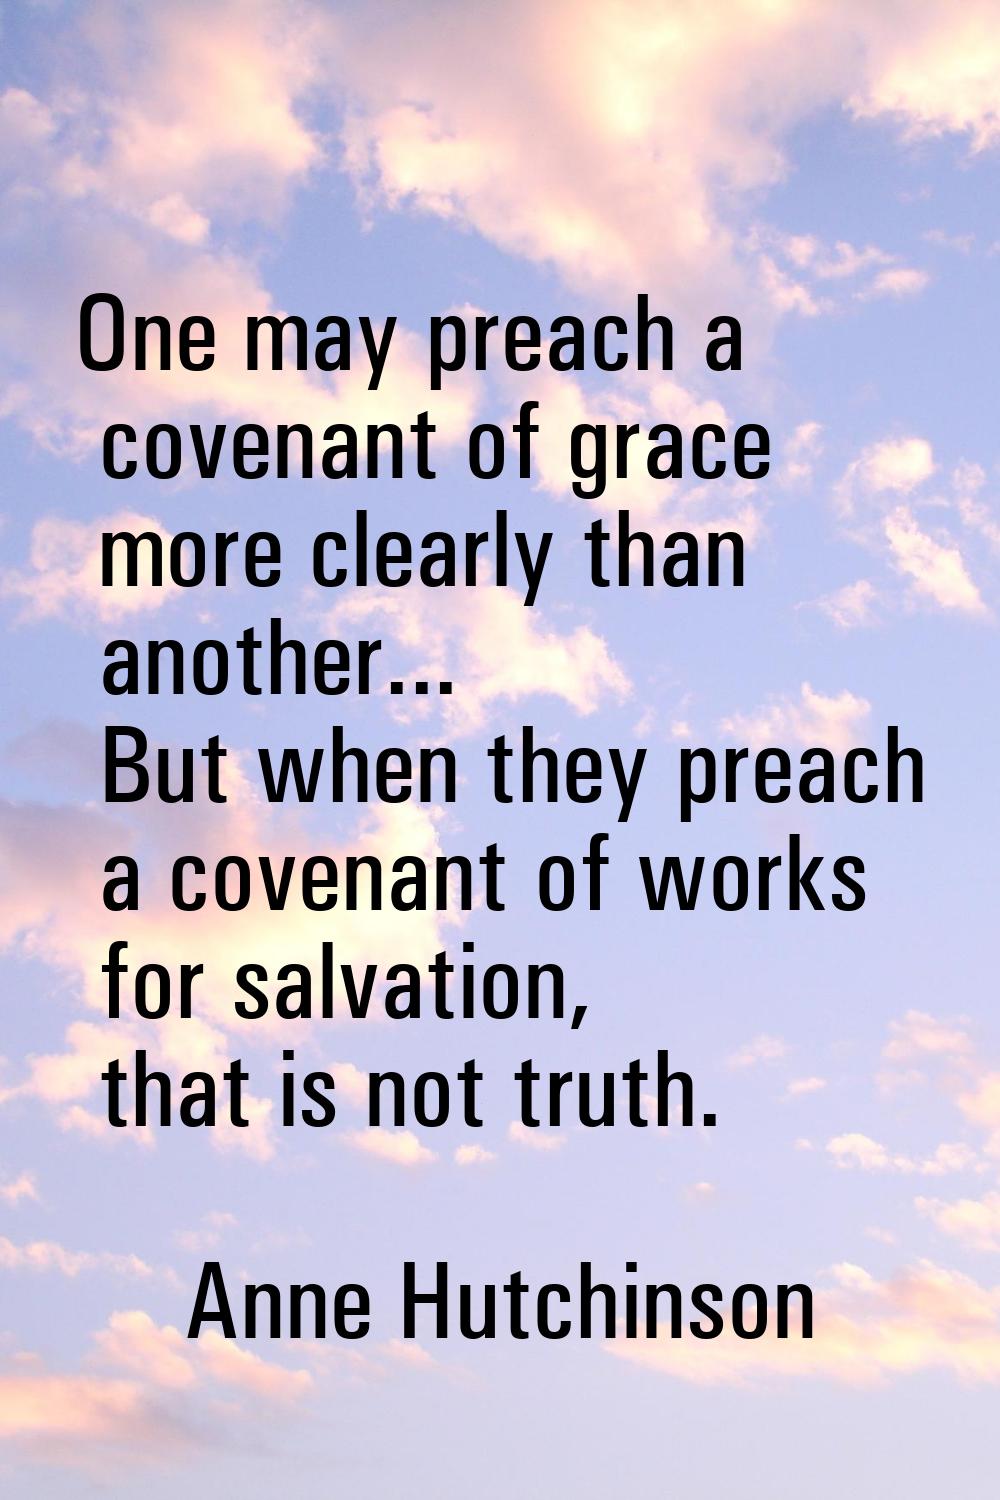 One may preach a covenant of grace more clearly than another... But when they preach a covenant of 